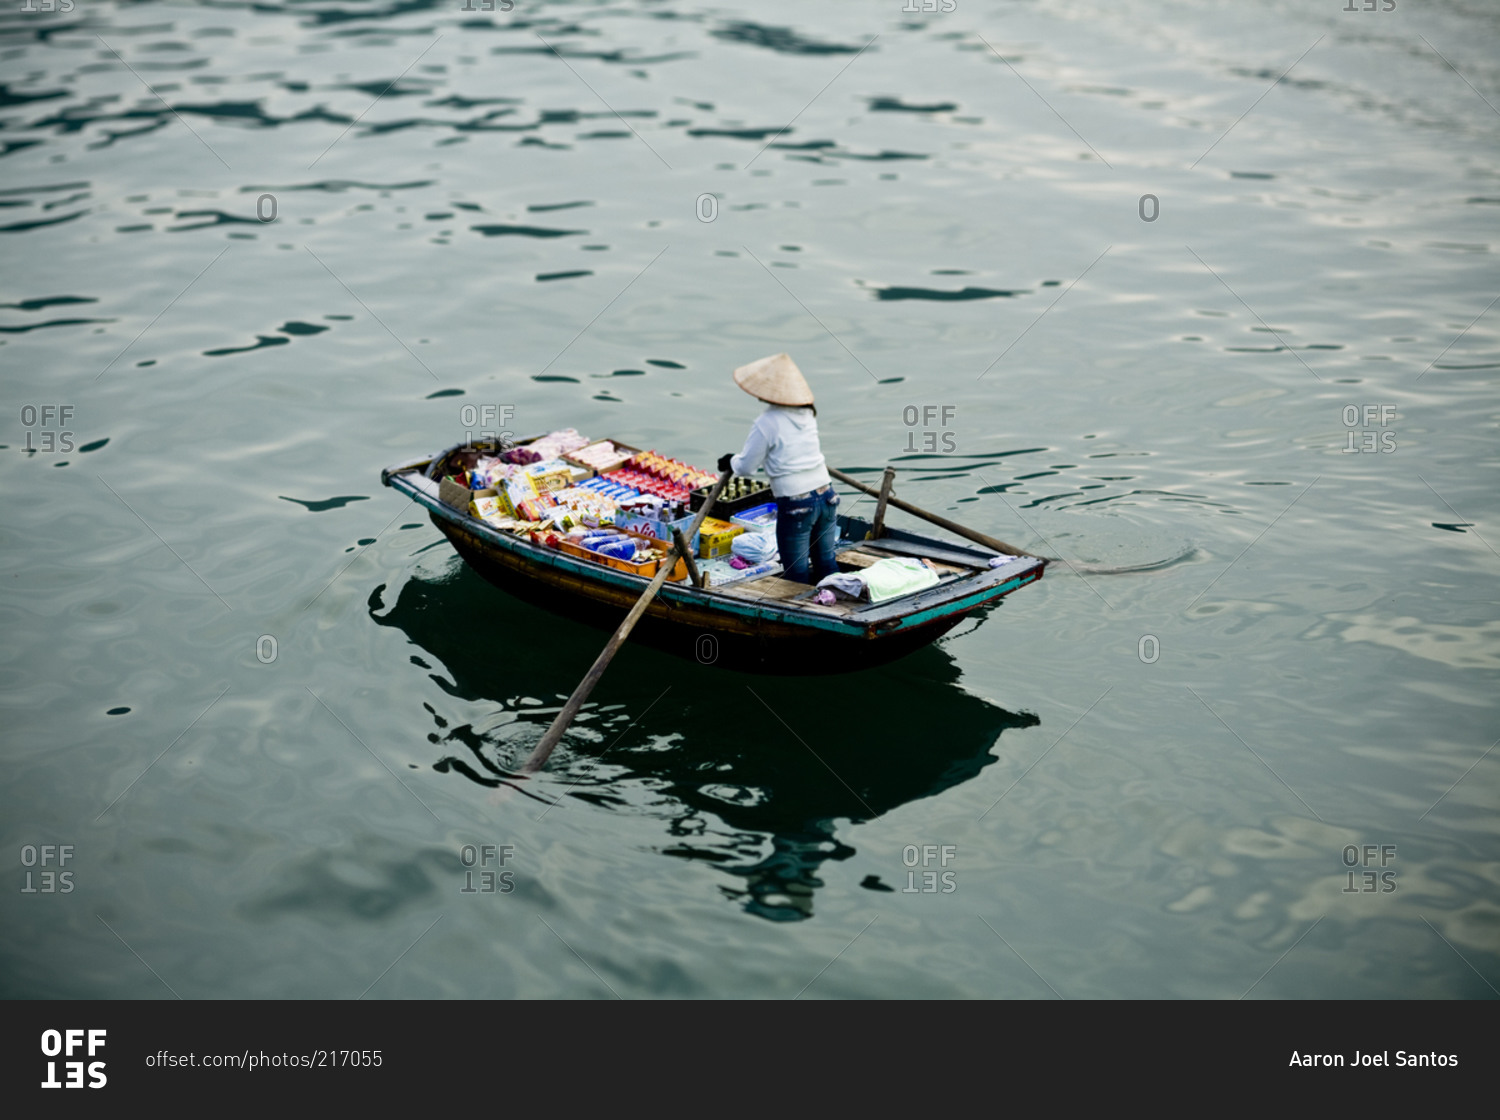 A boat travels along the waters of Halong Bay